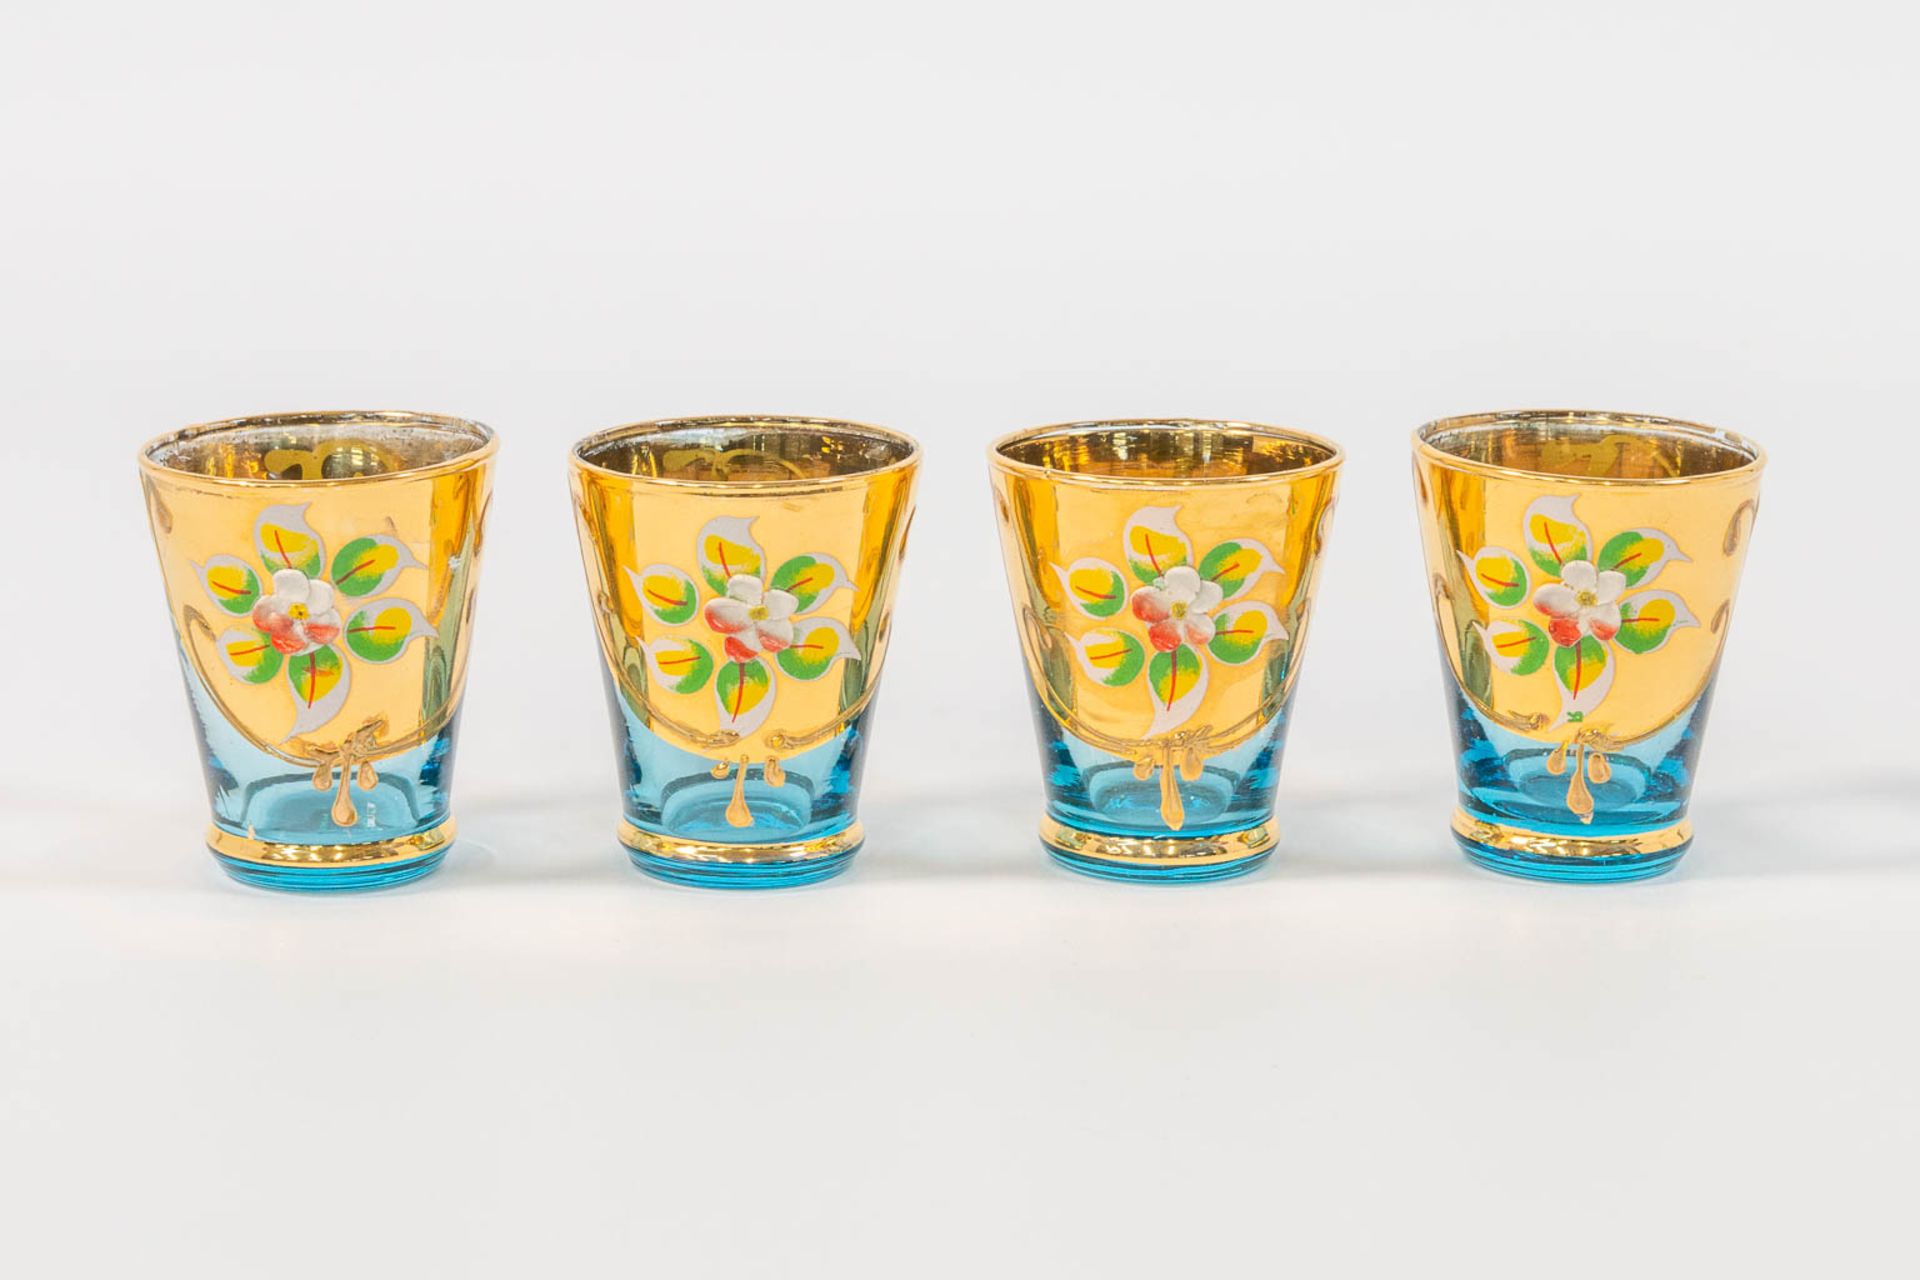 A decanter, glasses, and tray with gold painted flowers and etched decor. - Image 9 of 20